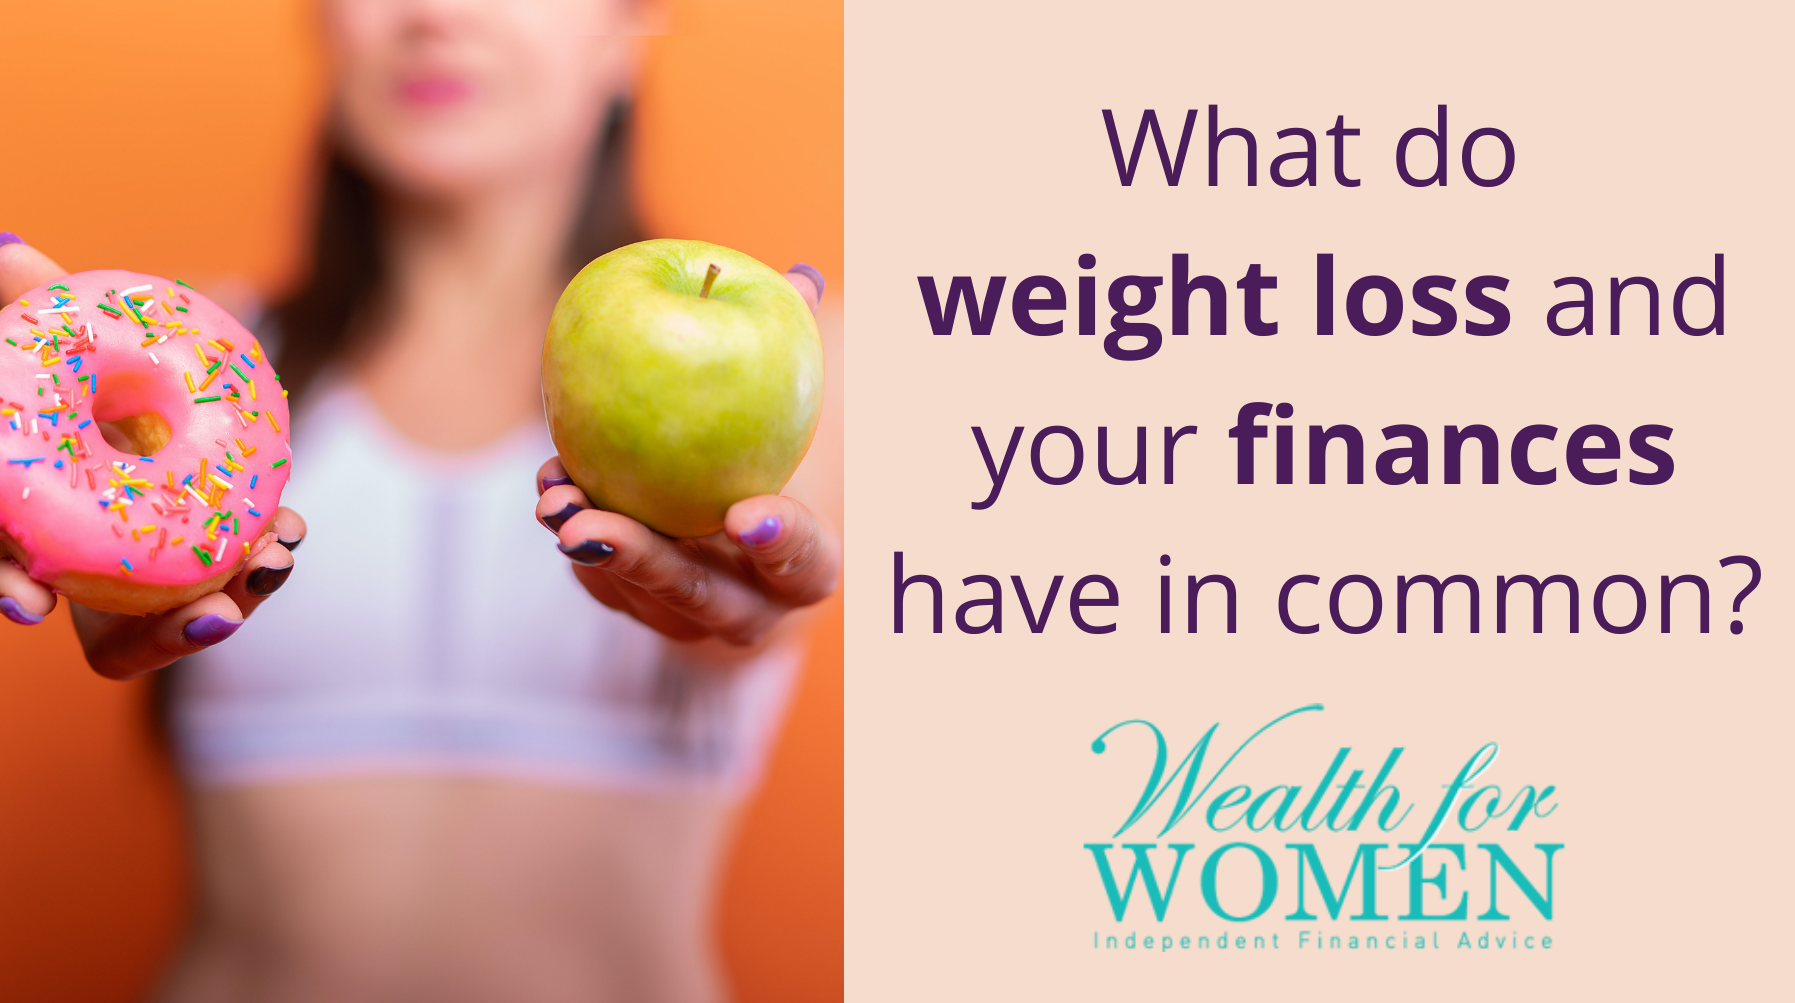 What do weight loss and finances have in common